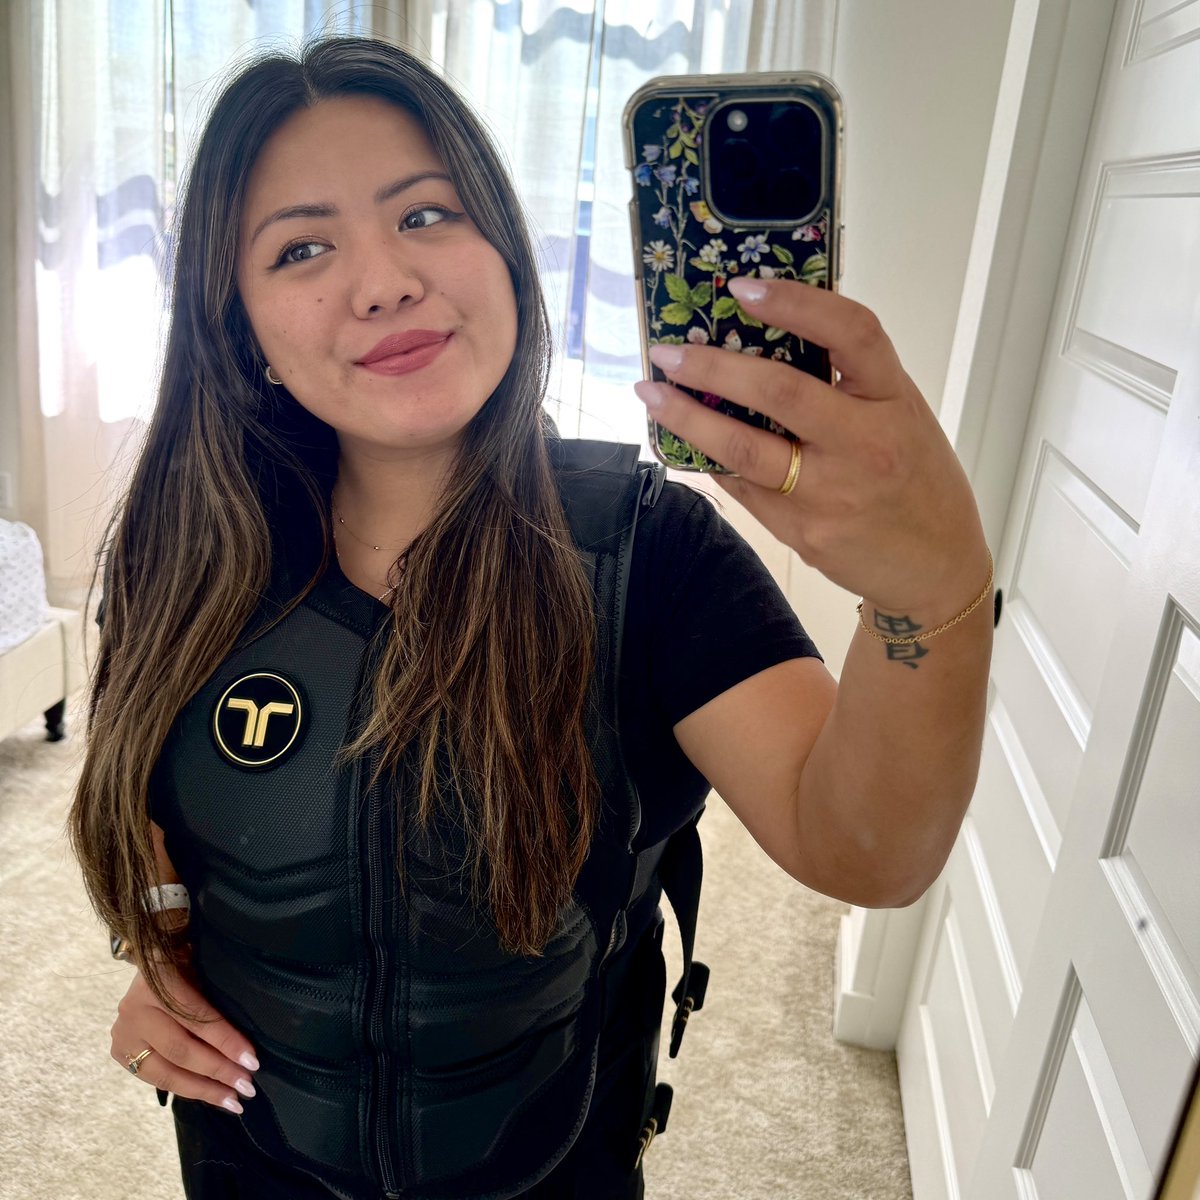 bHaptics vests are on SALE! This rarely ever happens so snag one while you can. @bhaptics is celebrating becoming an official 'Made for Meta' partner, which makes me hopeful to see more native standalone integrations 🤞 #VR #ad 20% off until 4/28/24 ➡️ bhaptics.com/shop